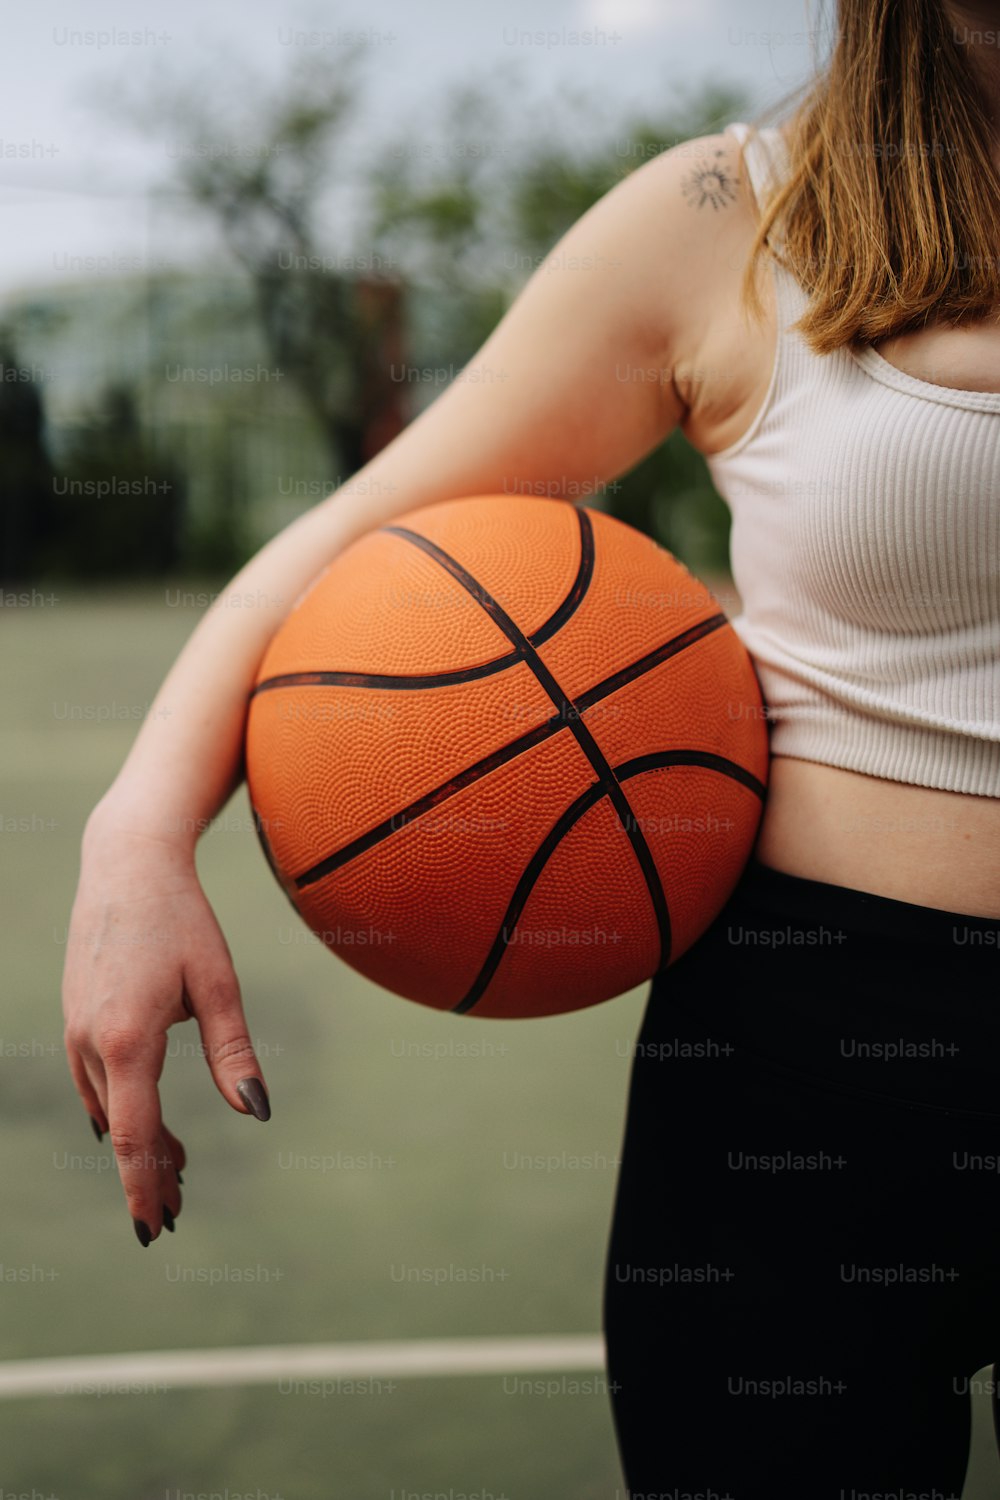 a woman holding a basketball on a tennis court